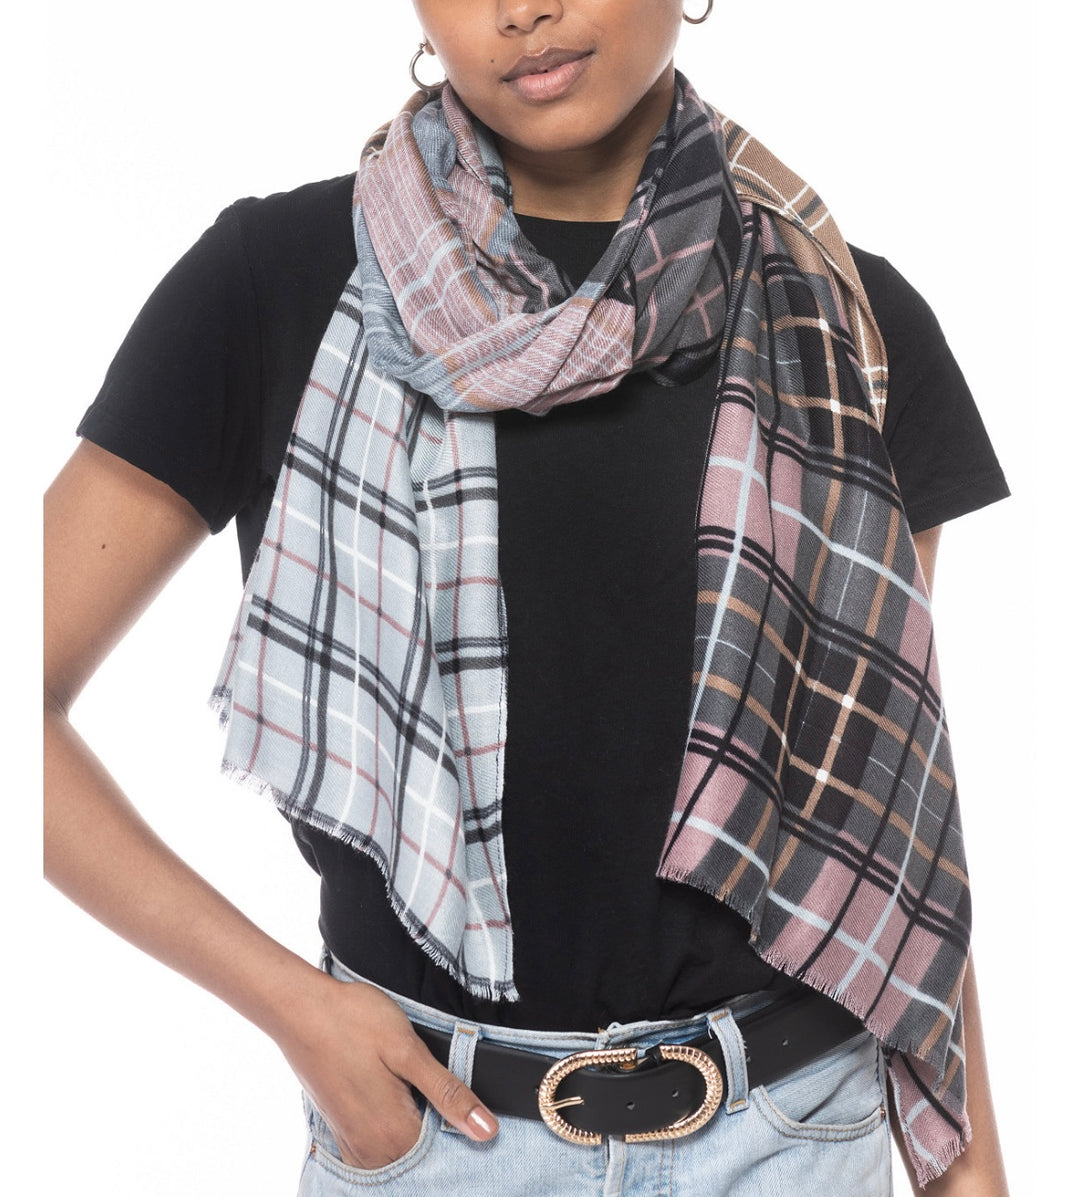 INC International Concepts Women's Patched Plaid Scarf